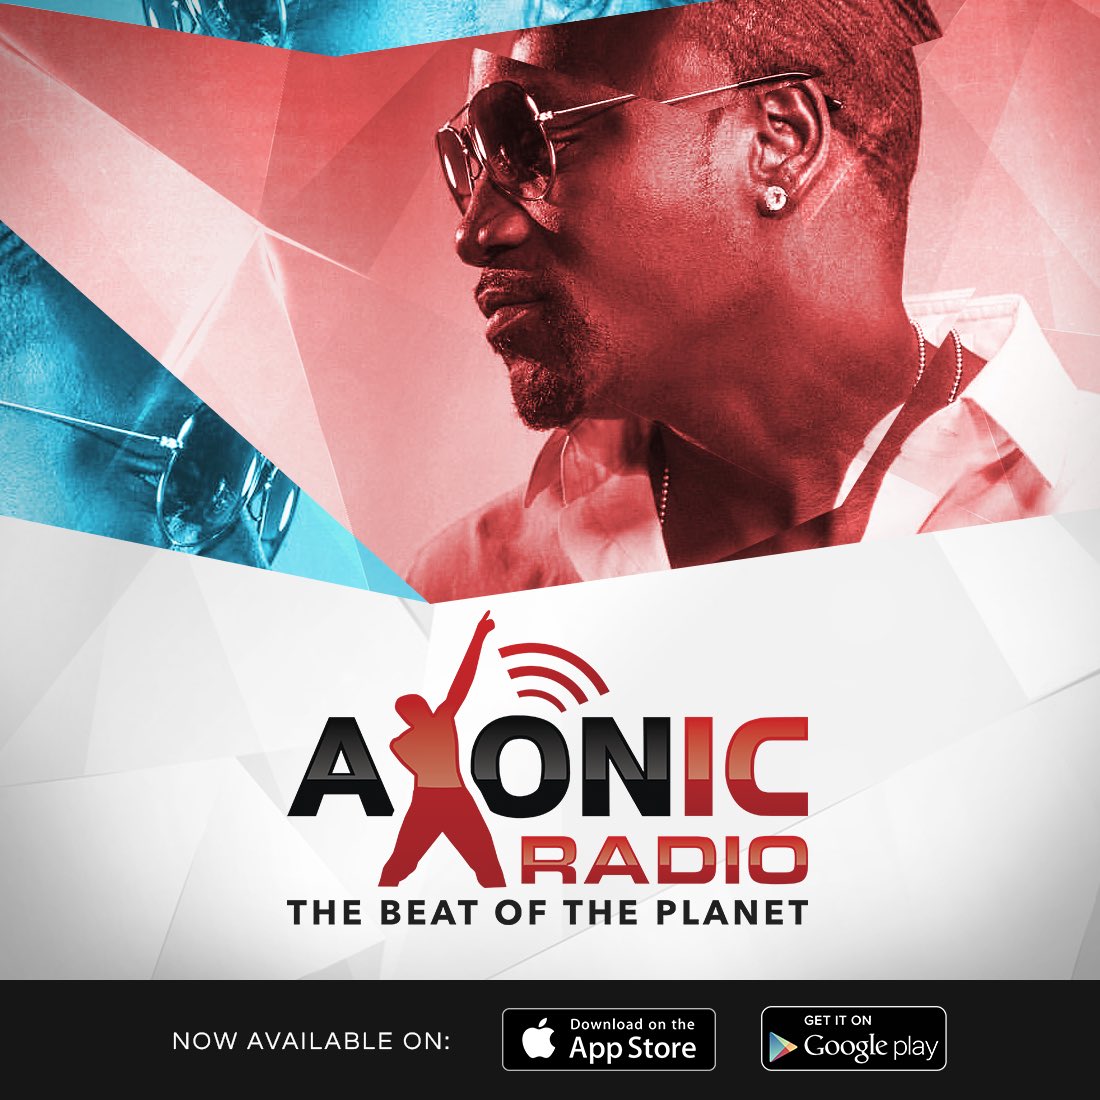 RT @akonicradio: Download the Akonic Radio app and stream the best music Non stop 24/7 worldwide #akonicradio https://t.co/lmM4TZGQl1